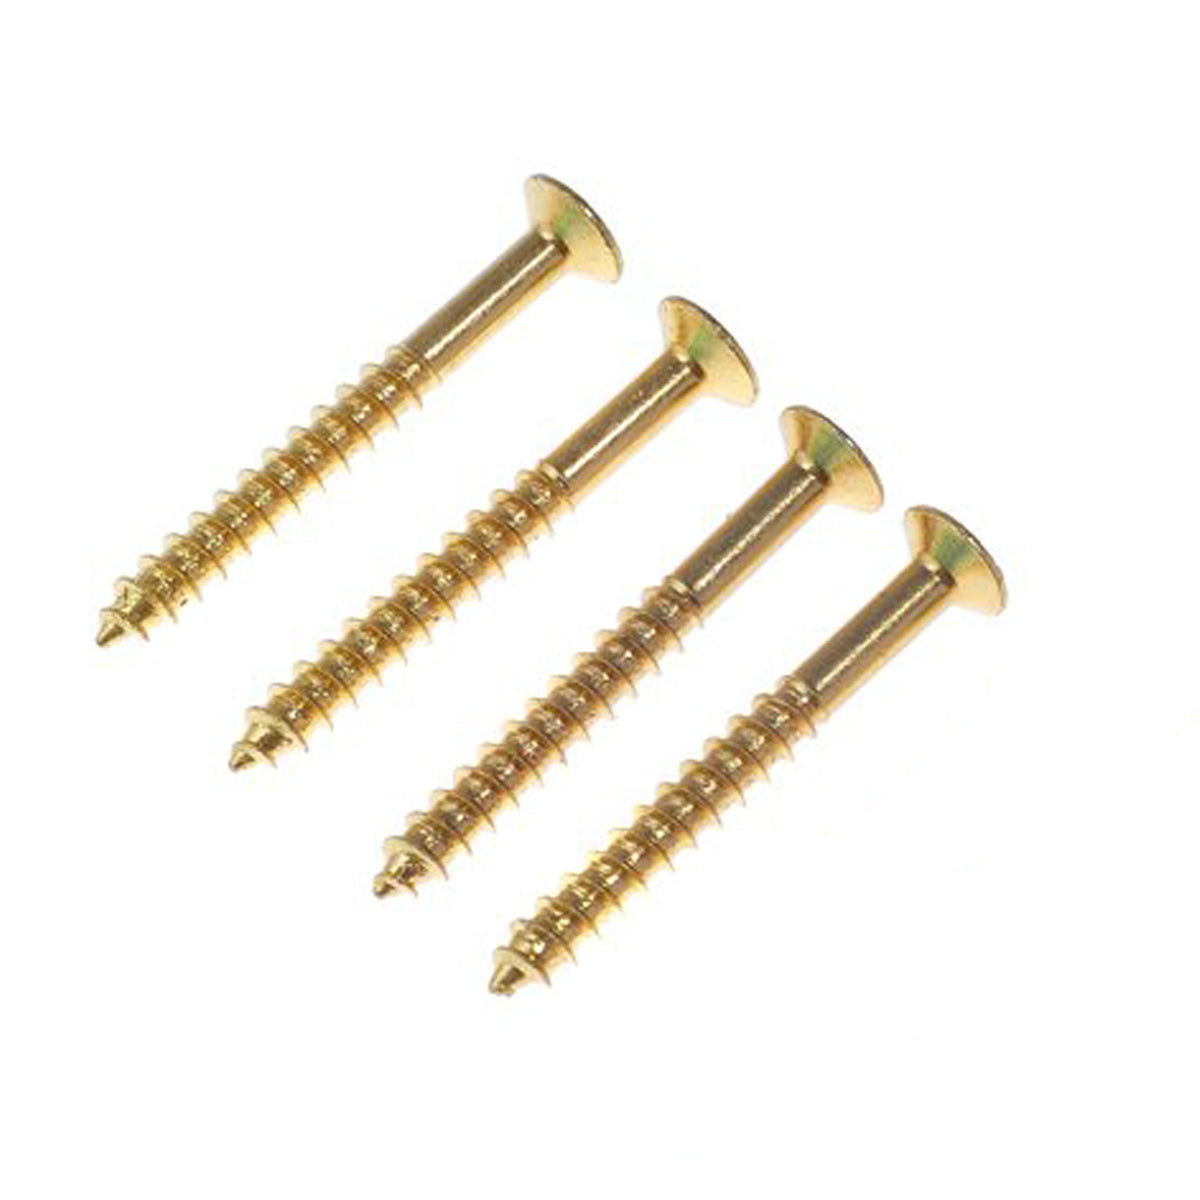 Musiclily 5x45mm Guitar Neck Plate Mounting Screws,Gold( 8 Pieces)